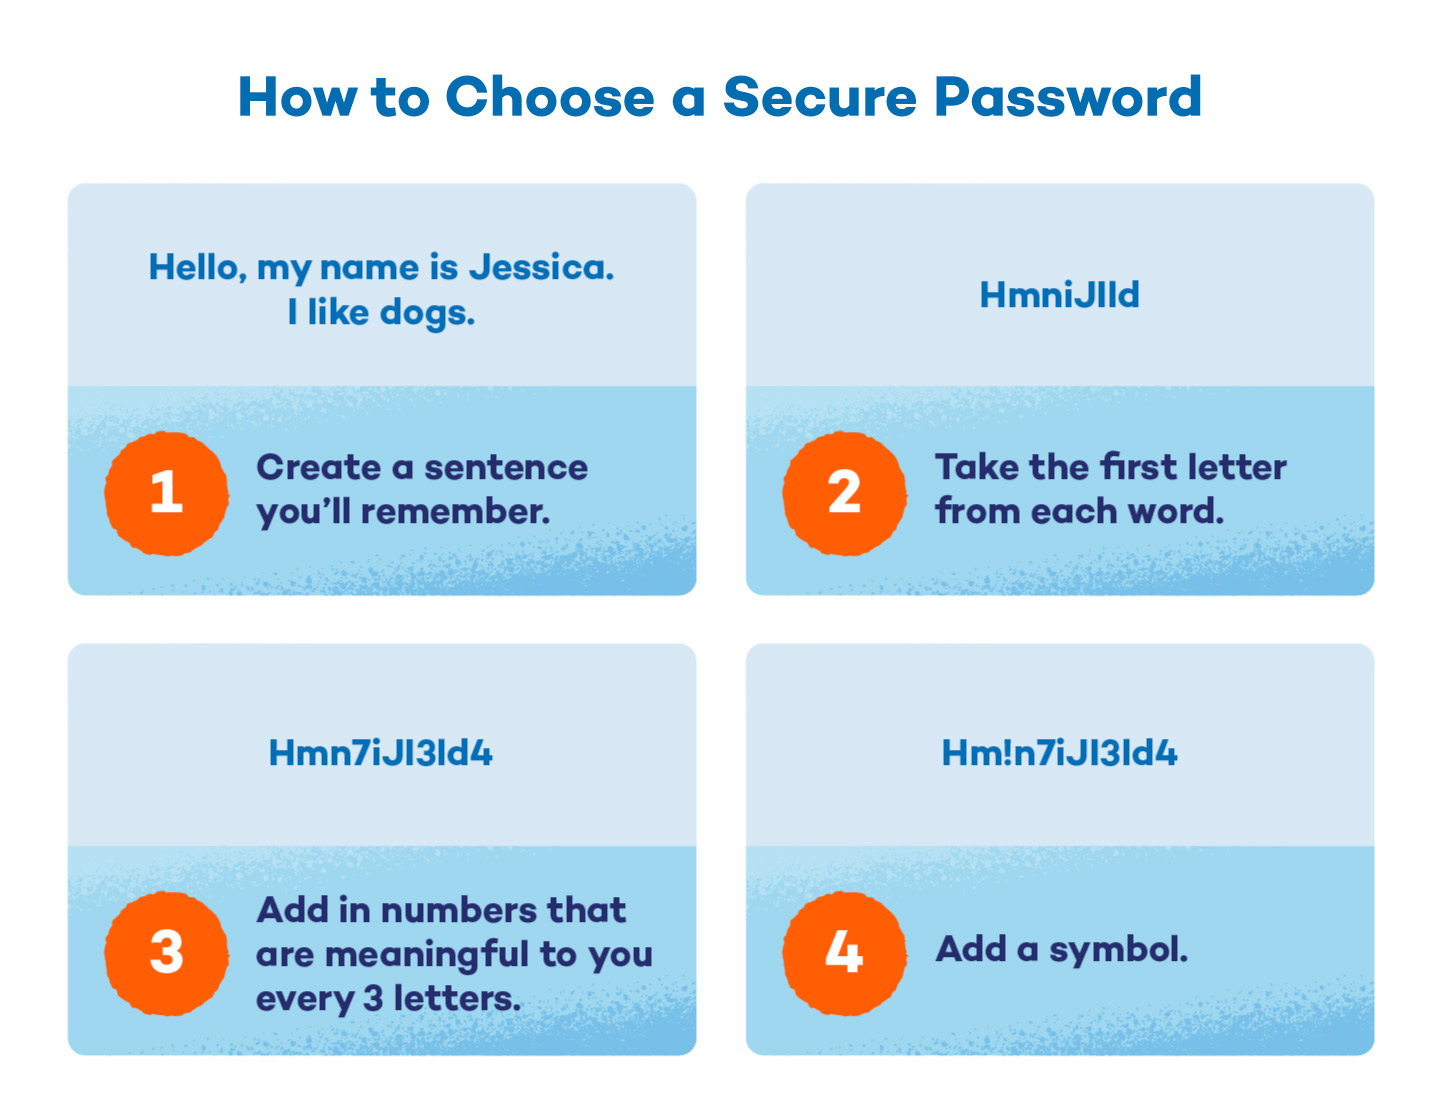 The four steps to choosing and creating a secure password